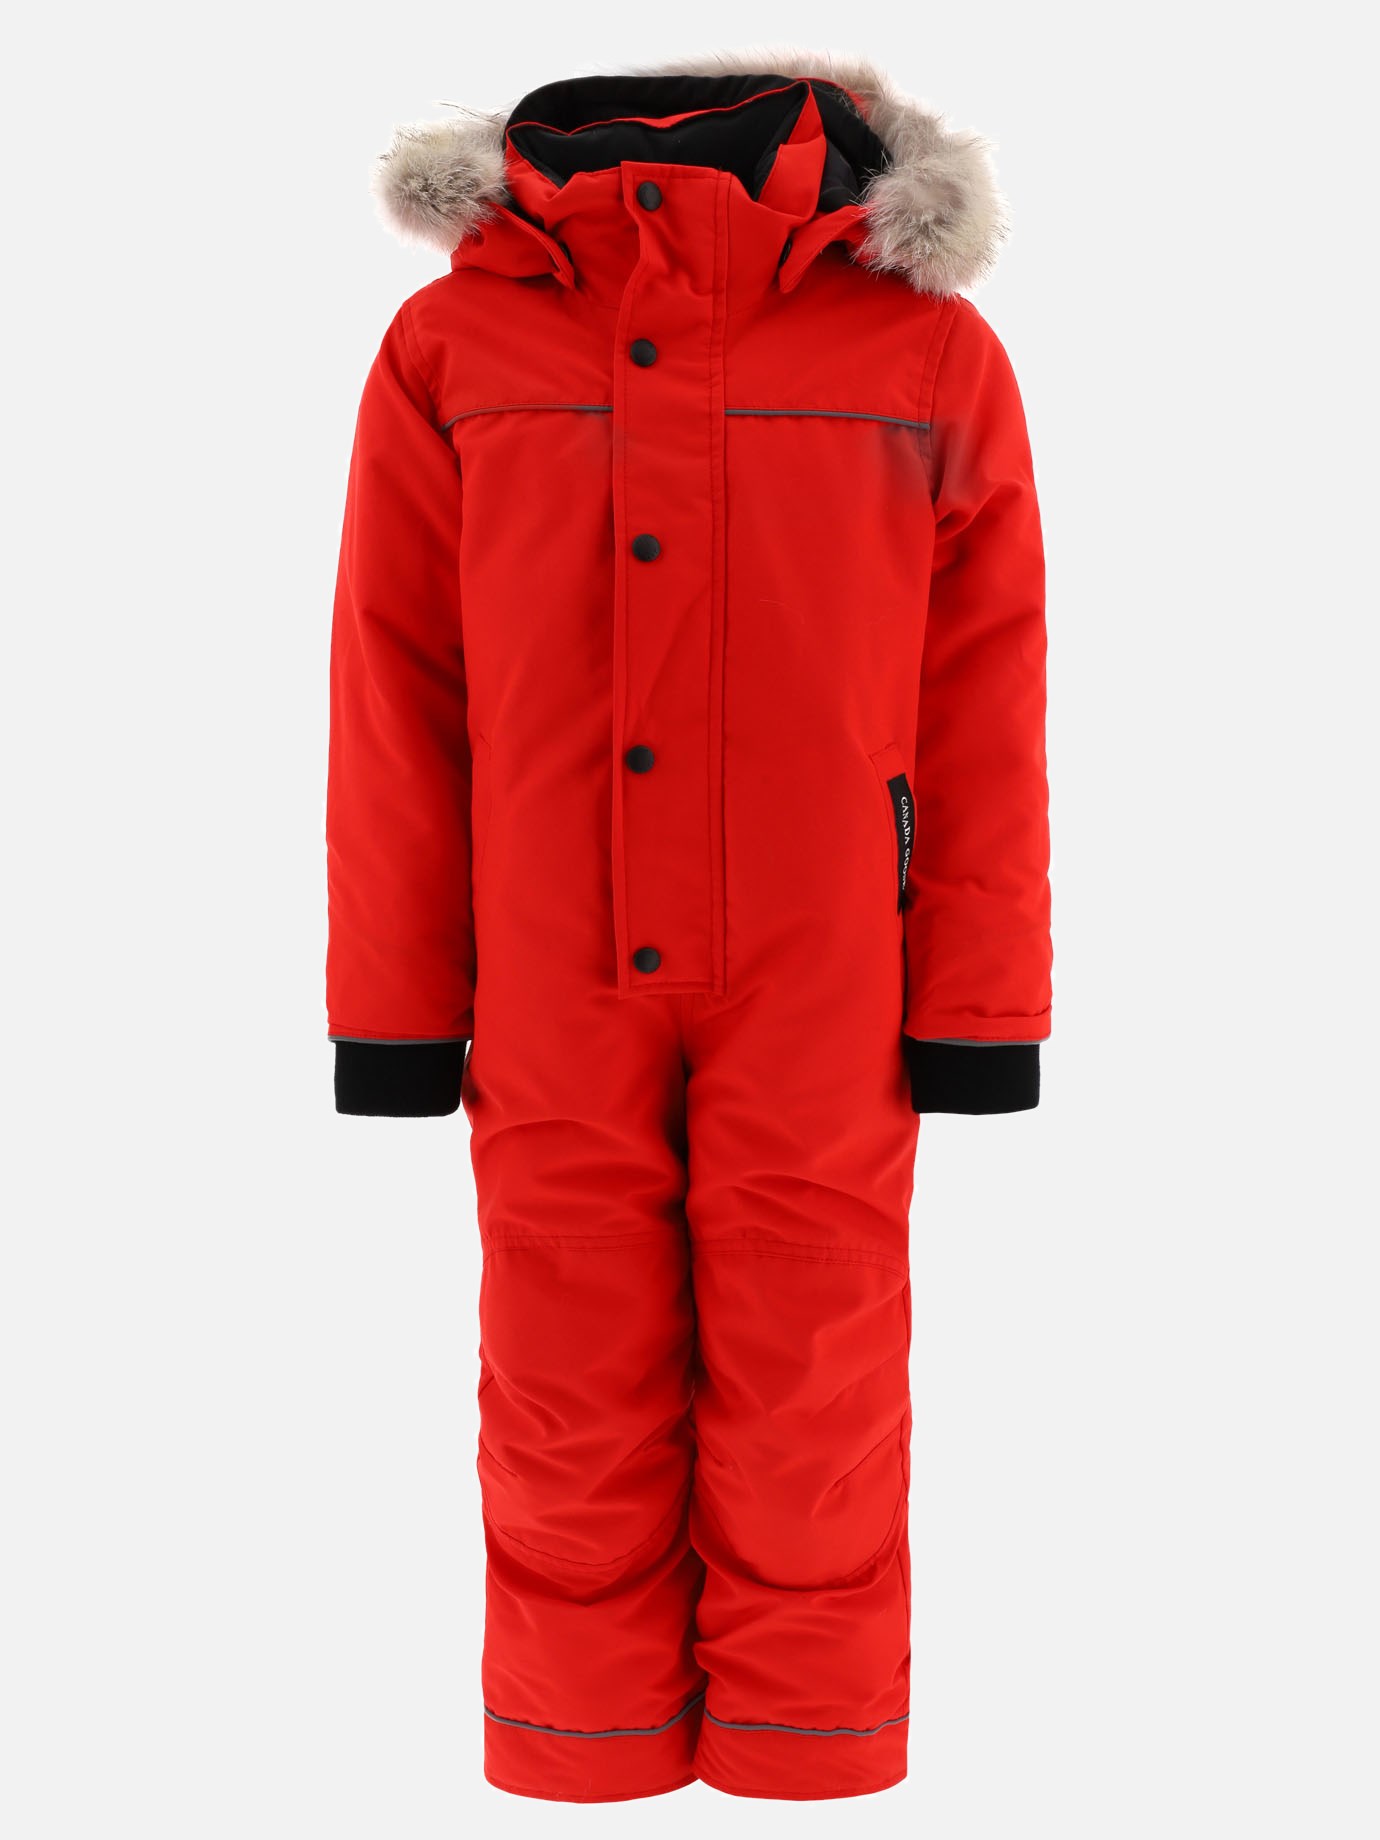  Grizzly  snowsuitby Canada Goose Kids - 4